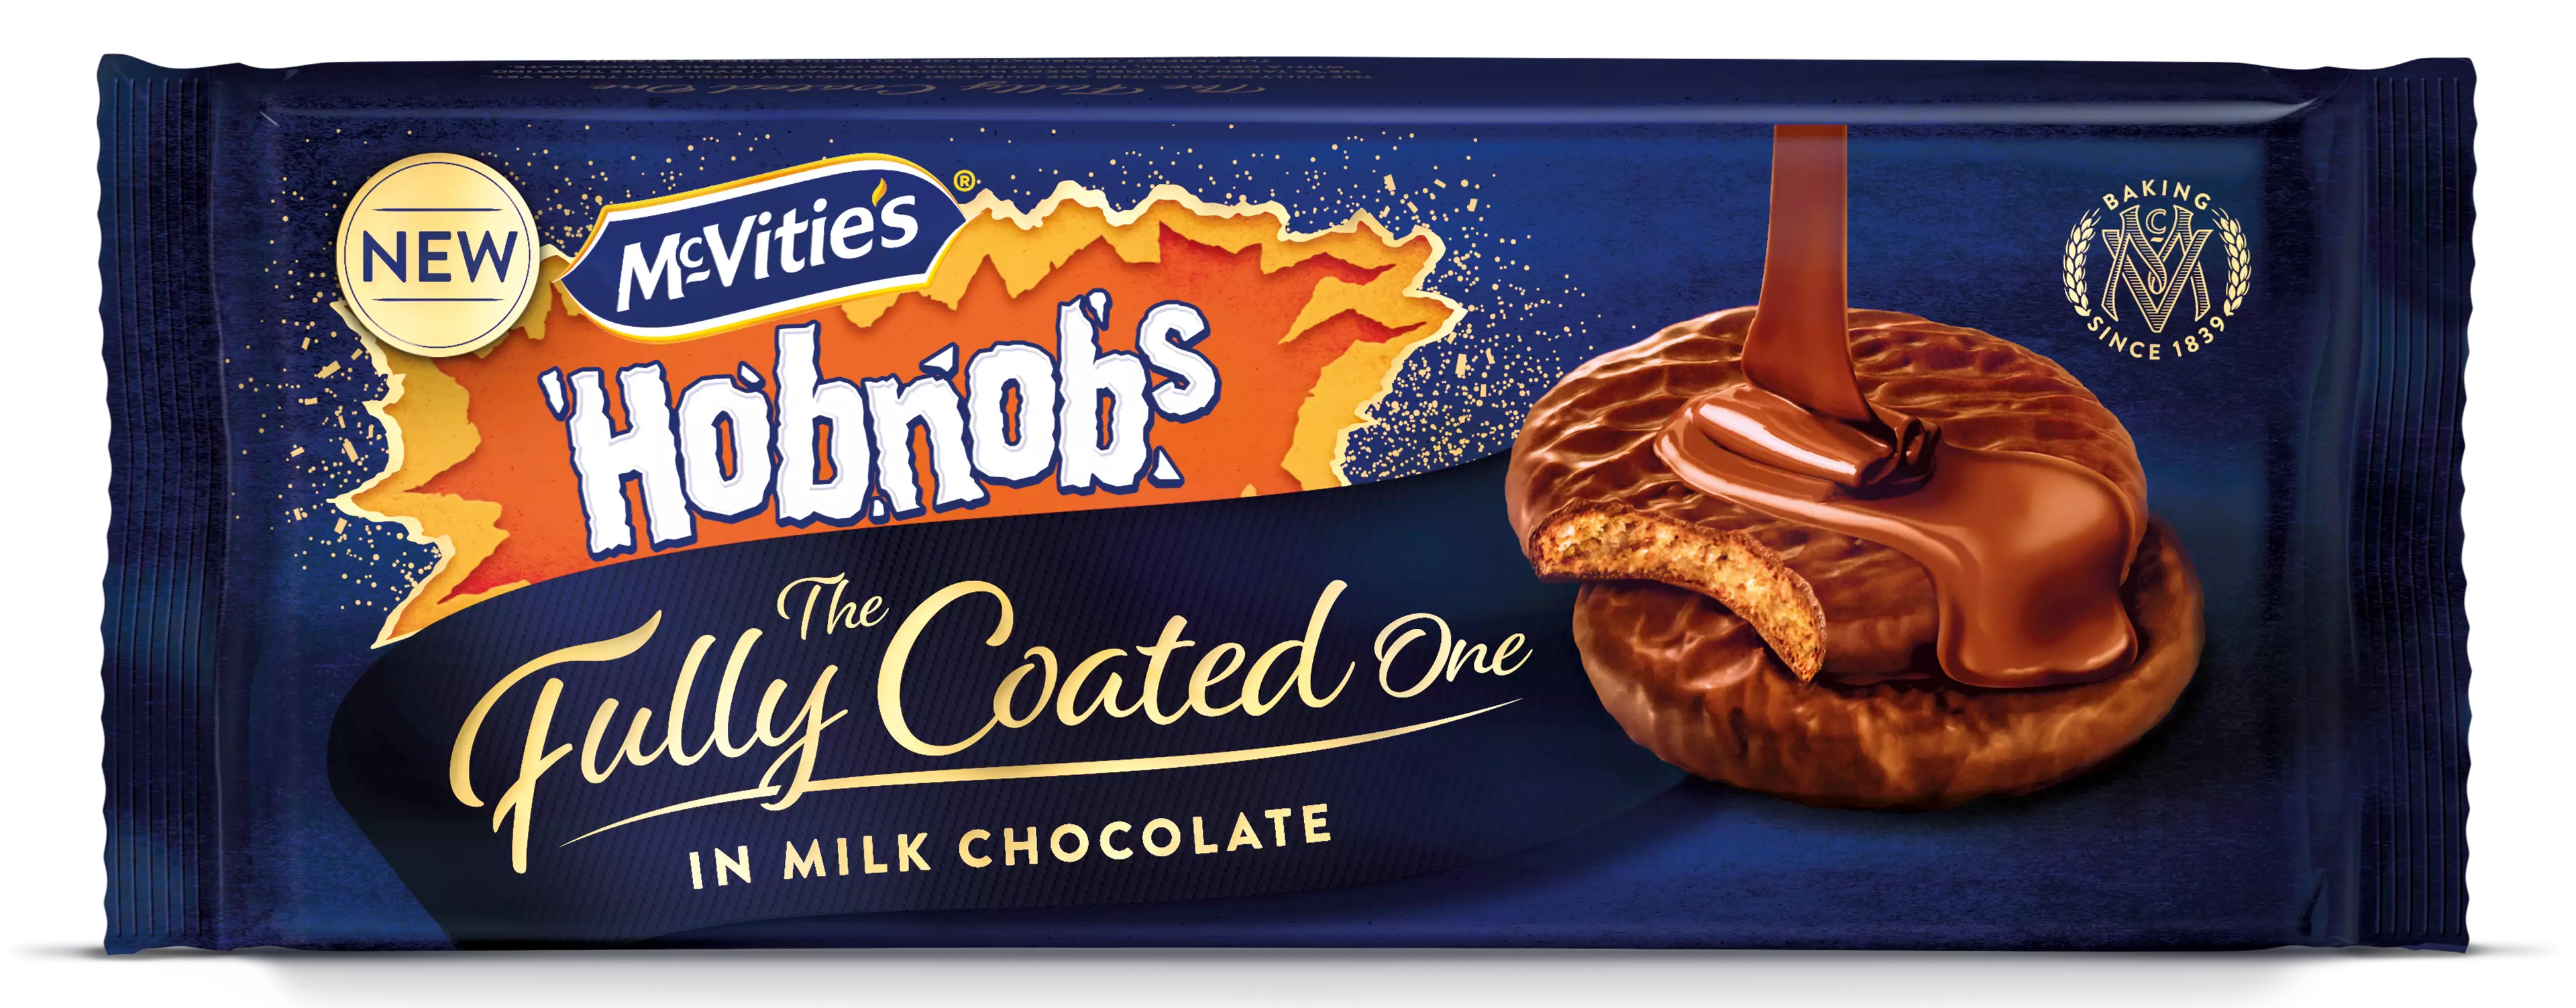 McVitie's has introduced Fully Coated Hobnobs too (